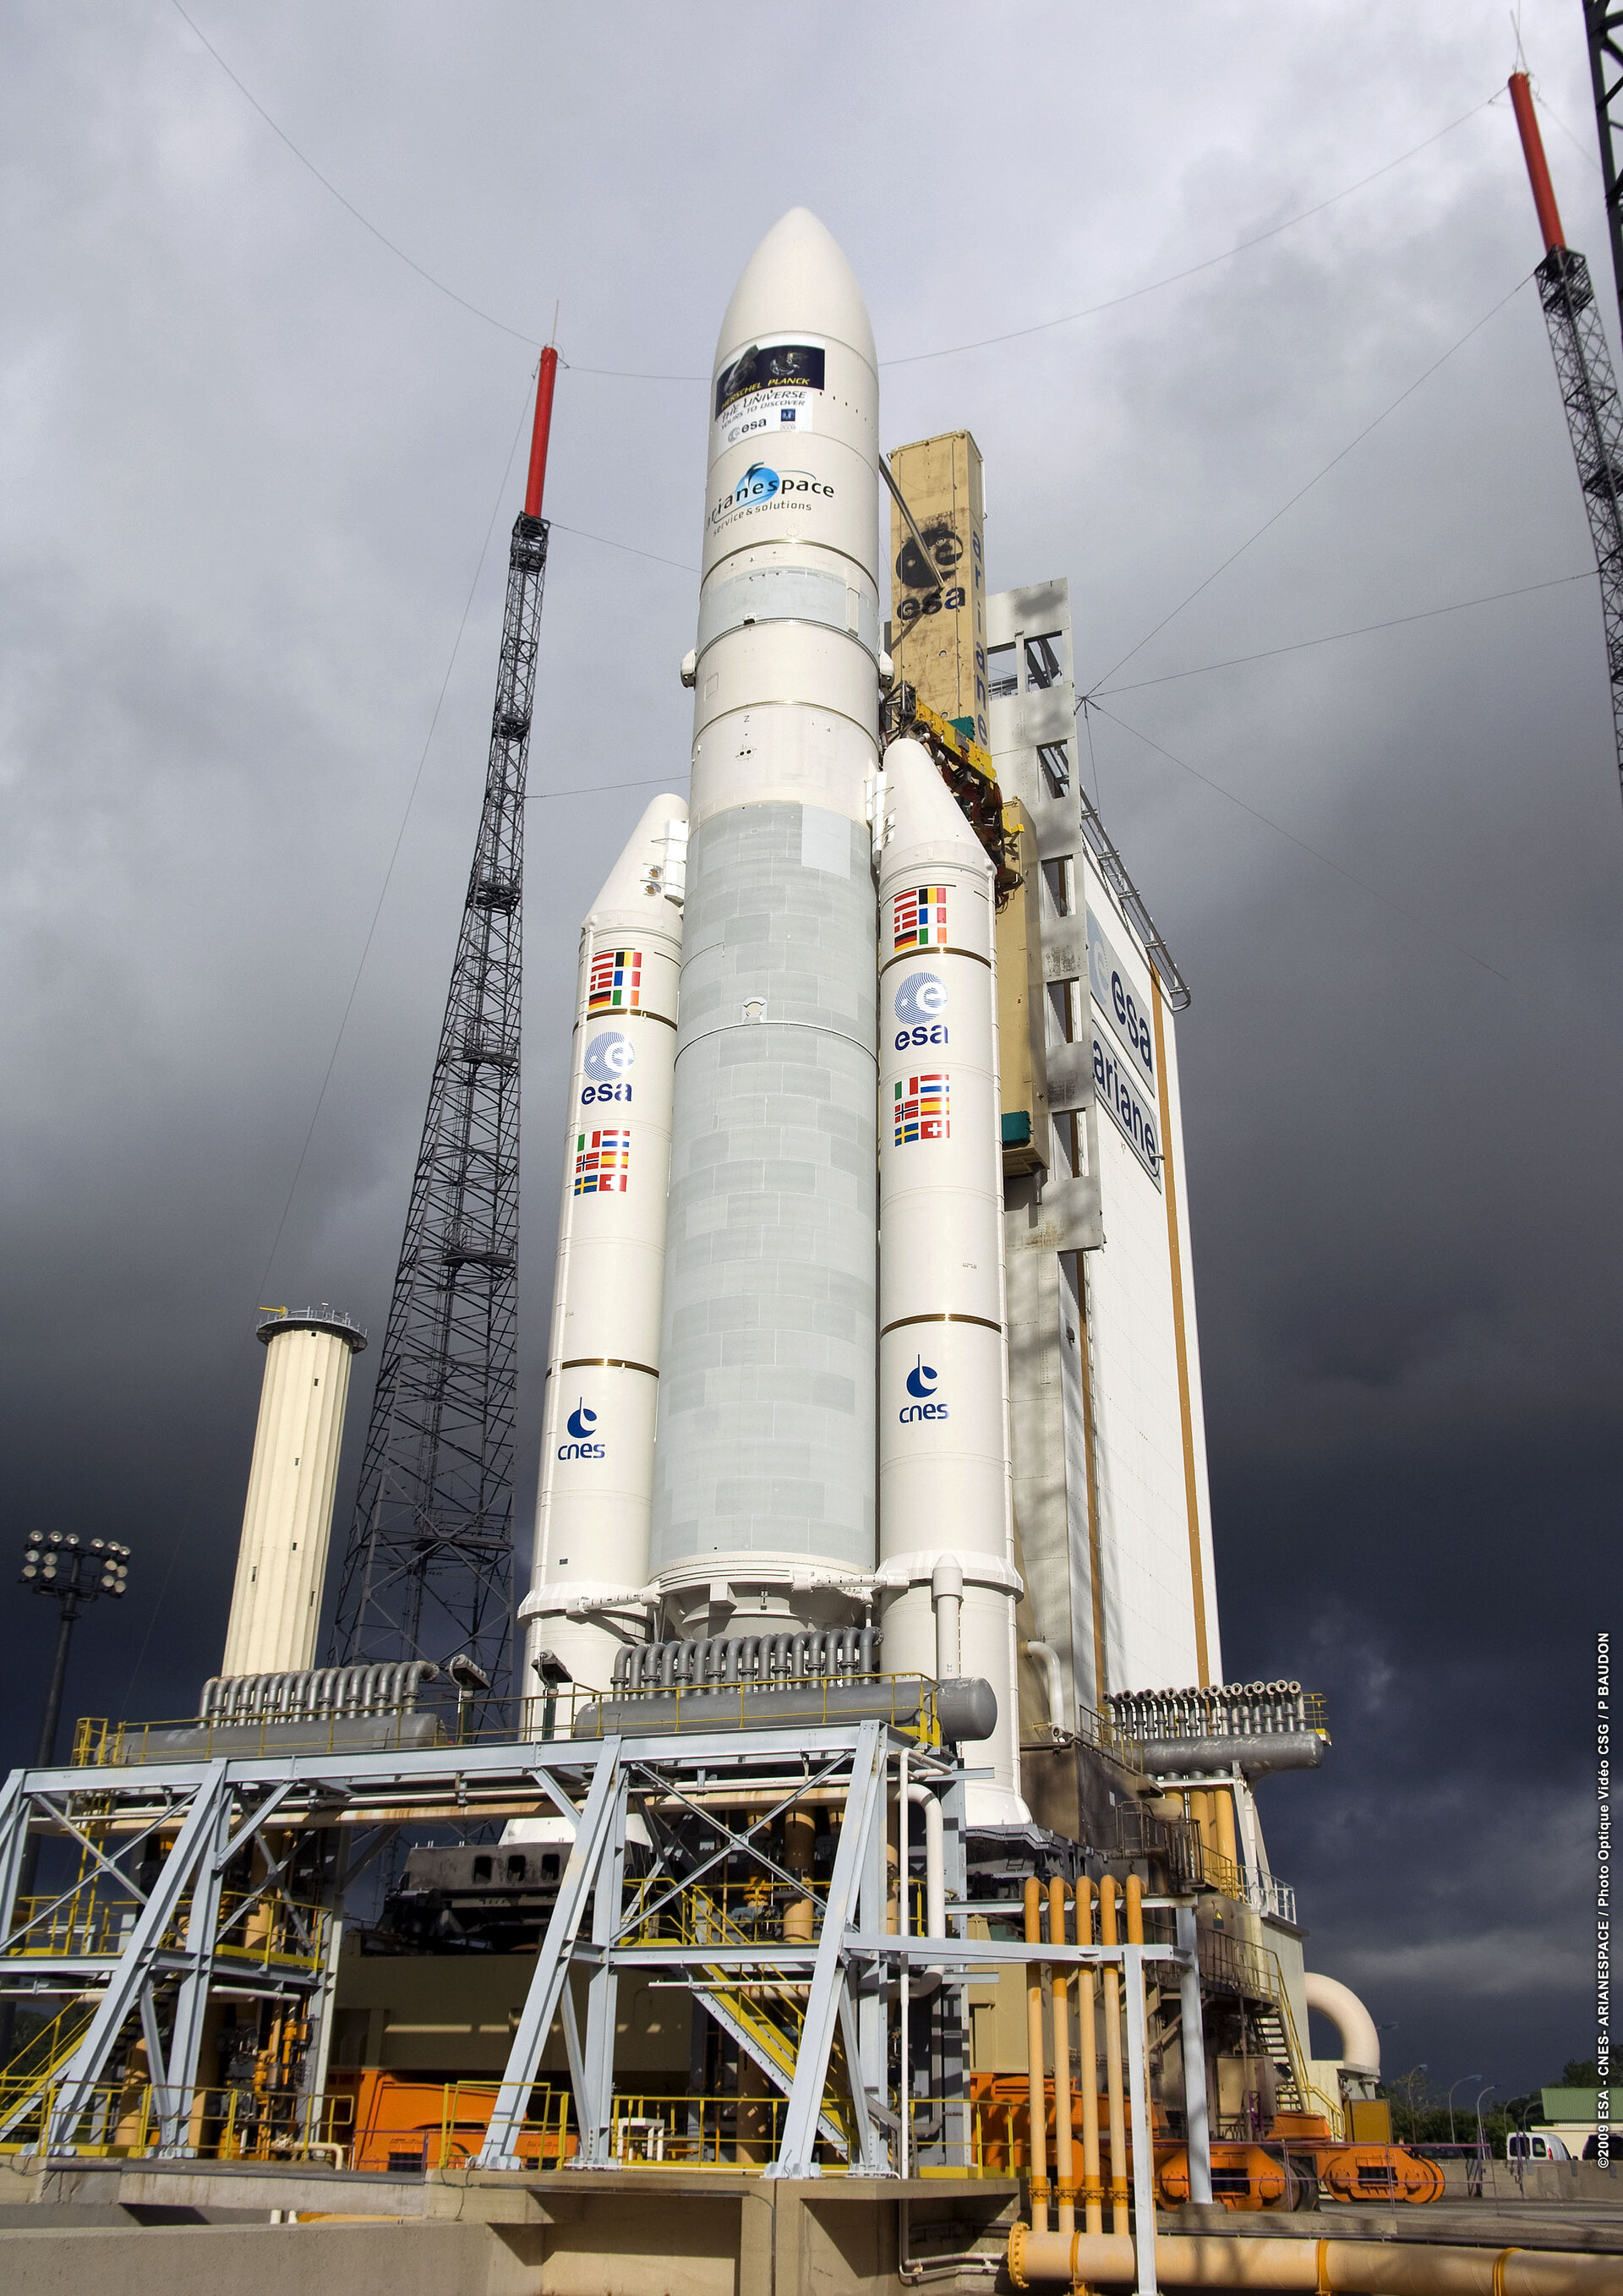 Ariane 5 with Herschel and Planck at launch pad